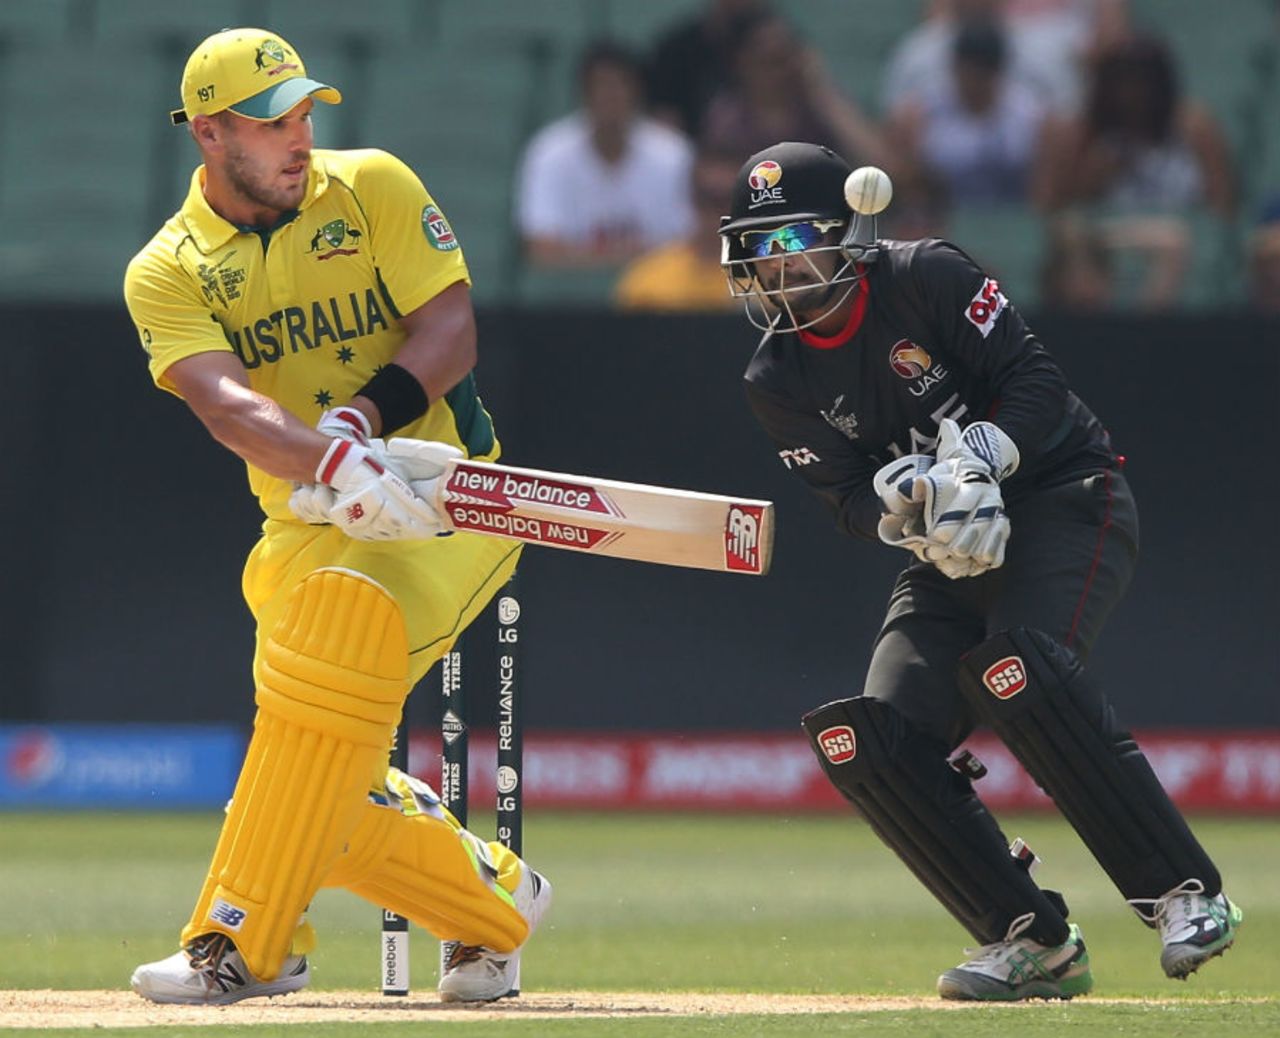 Aaron Finch plays off his hips, Australia v UAE, World Cup warm-up, Melbourne, February 11, 2015 